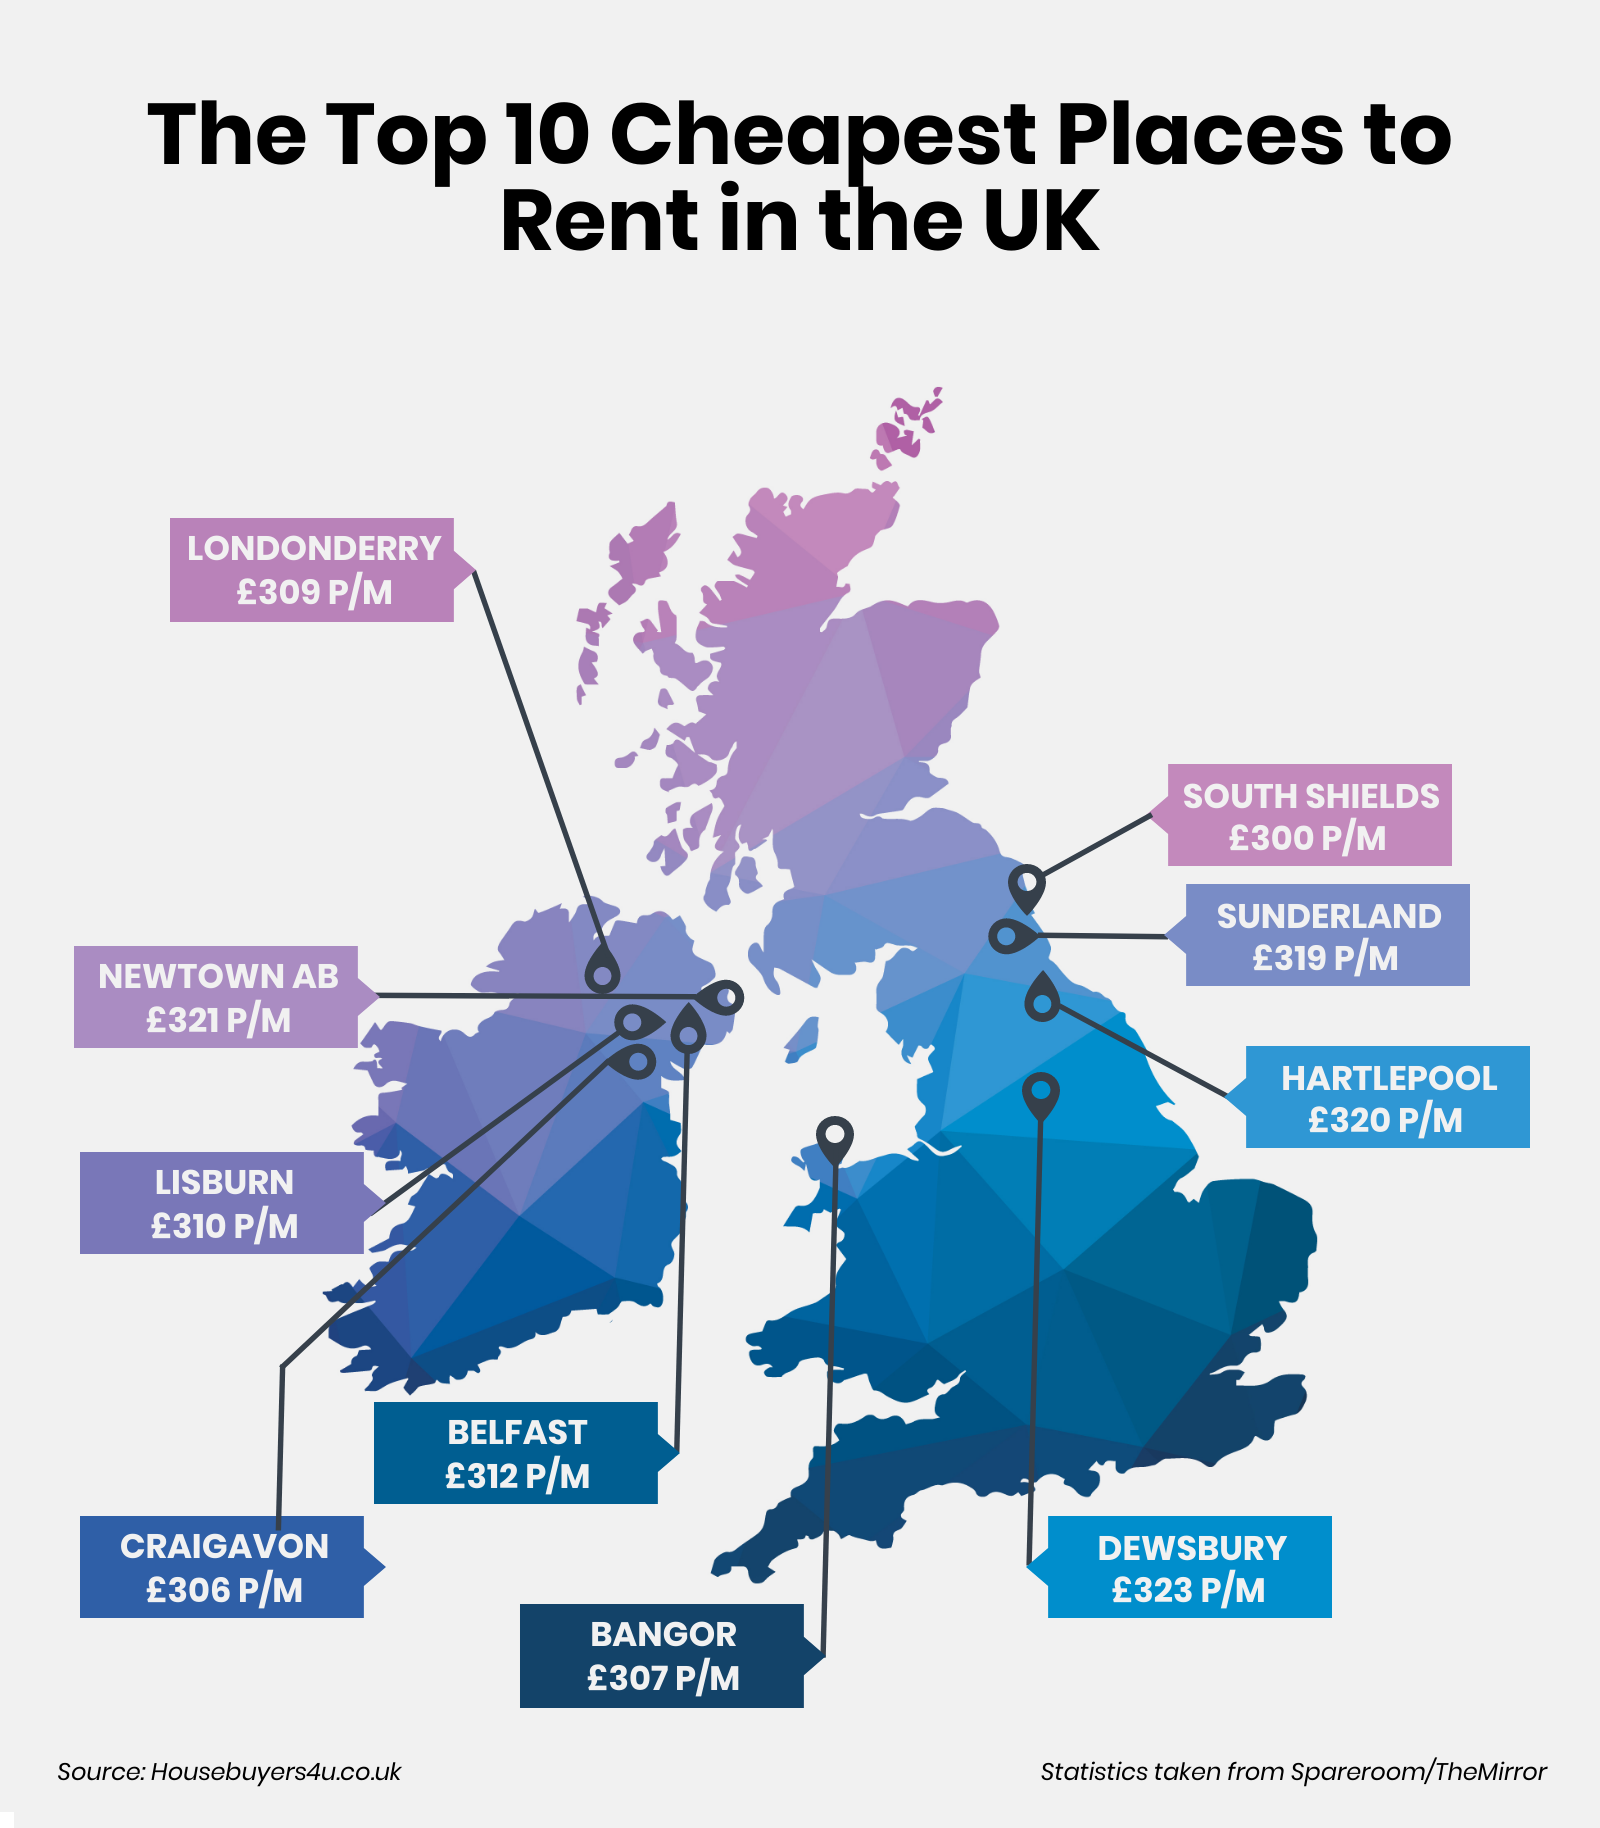 UK's Top 10 Cheapest & Most Expensive Places to Rent Revealed